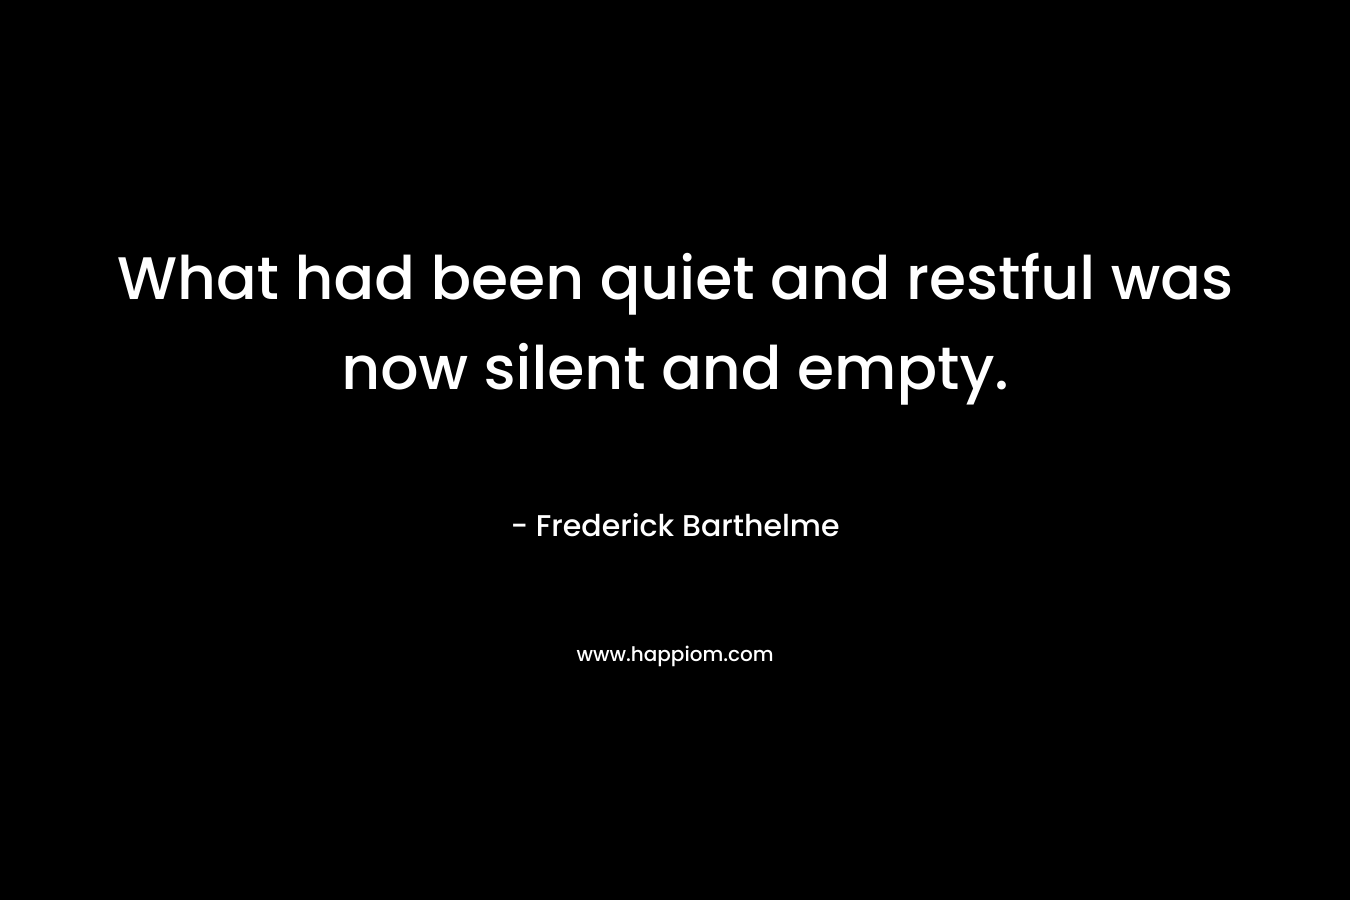 What had been quiet and restful was now silent and empty. – Frederick Barthelme